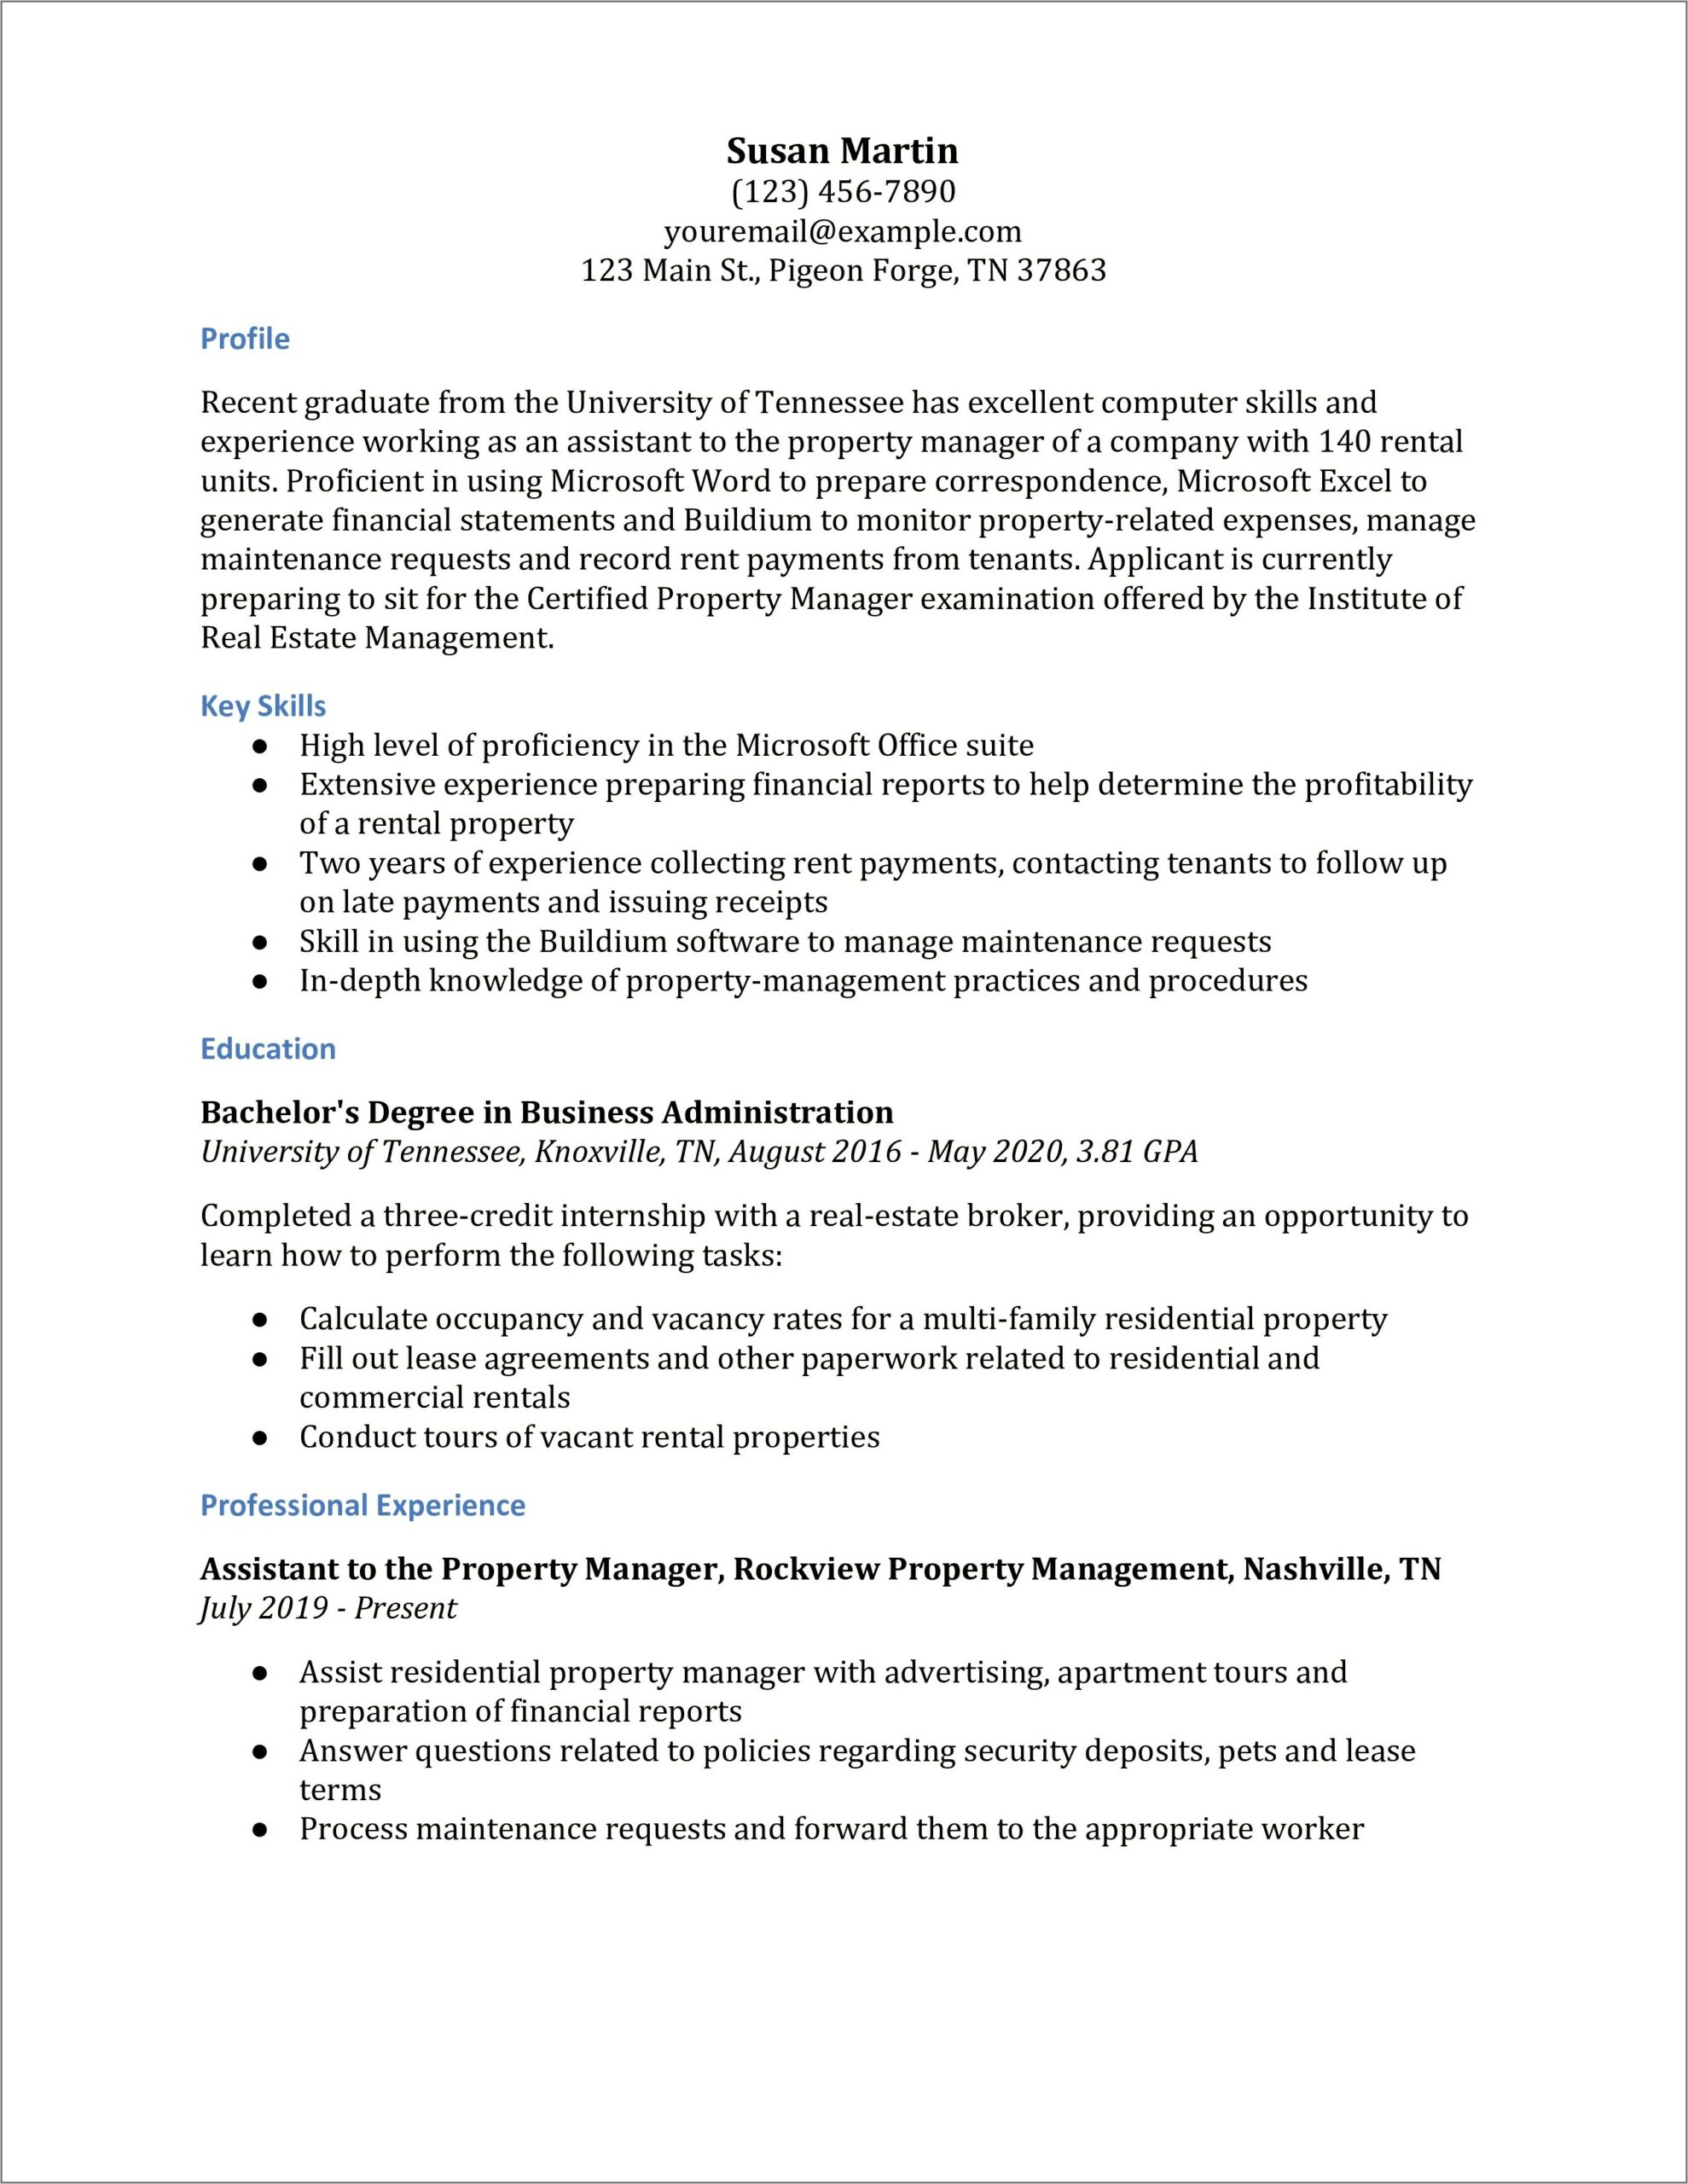 Examples Of A Resume For Property Management